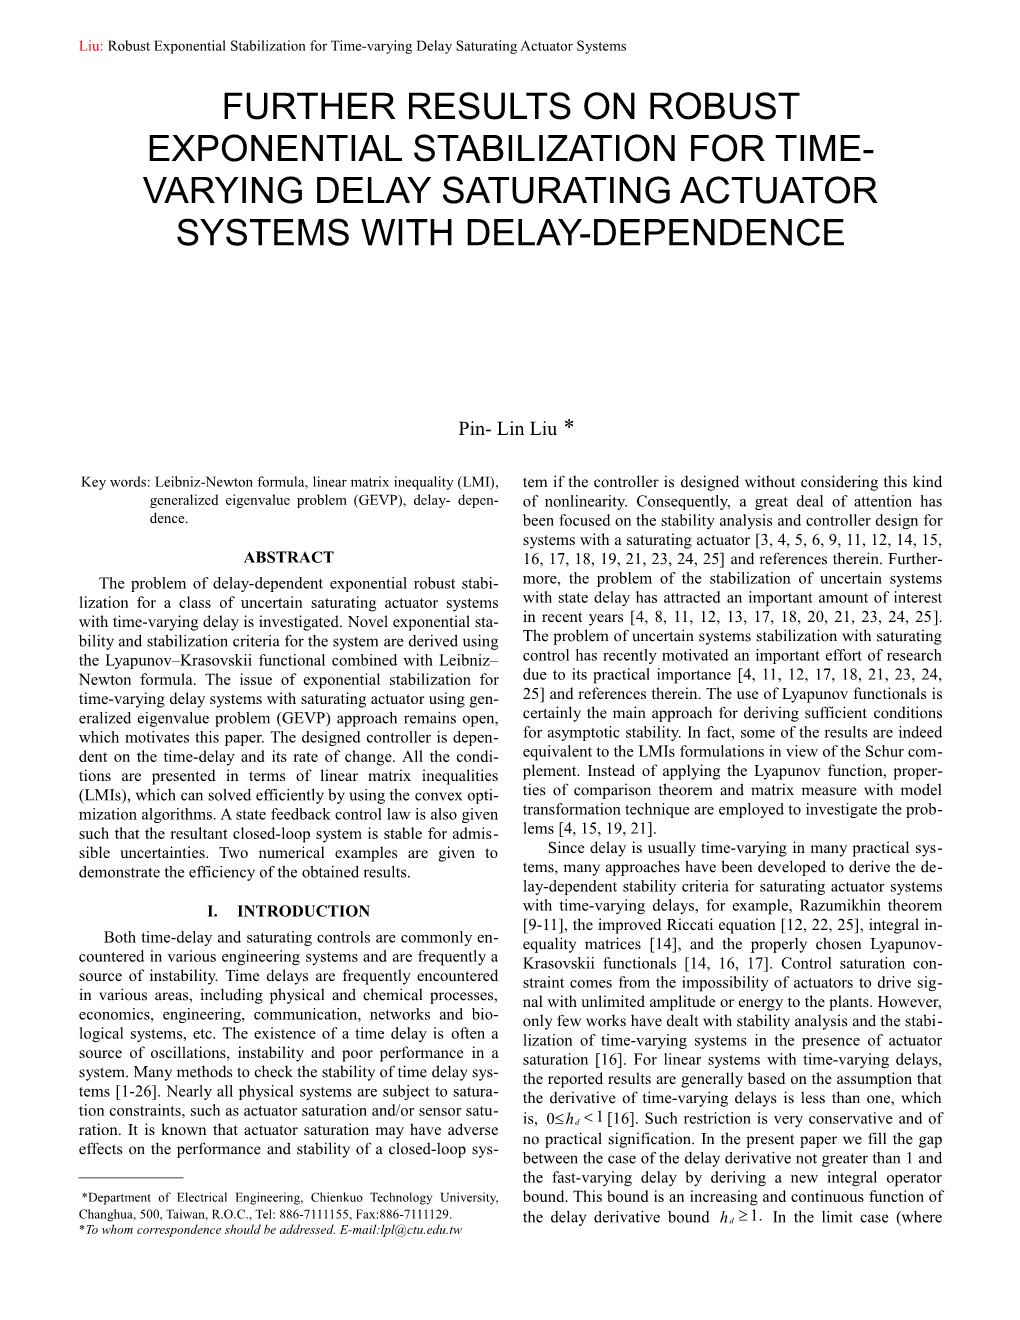 Liu:Robust Exponential Stabilization for Time-Varying Delay Saturating Actuator Systems